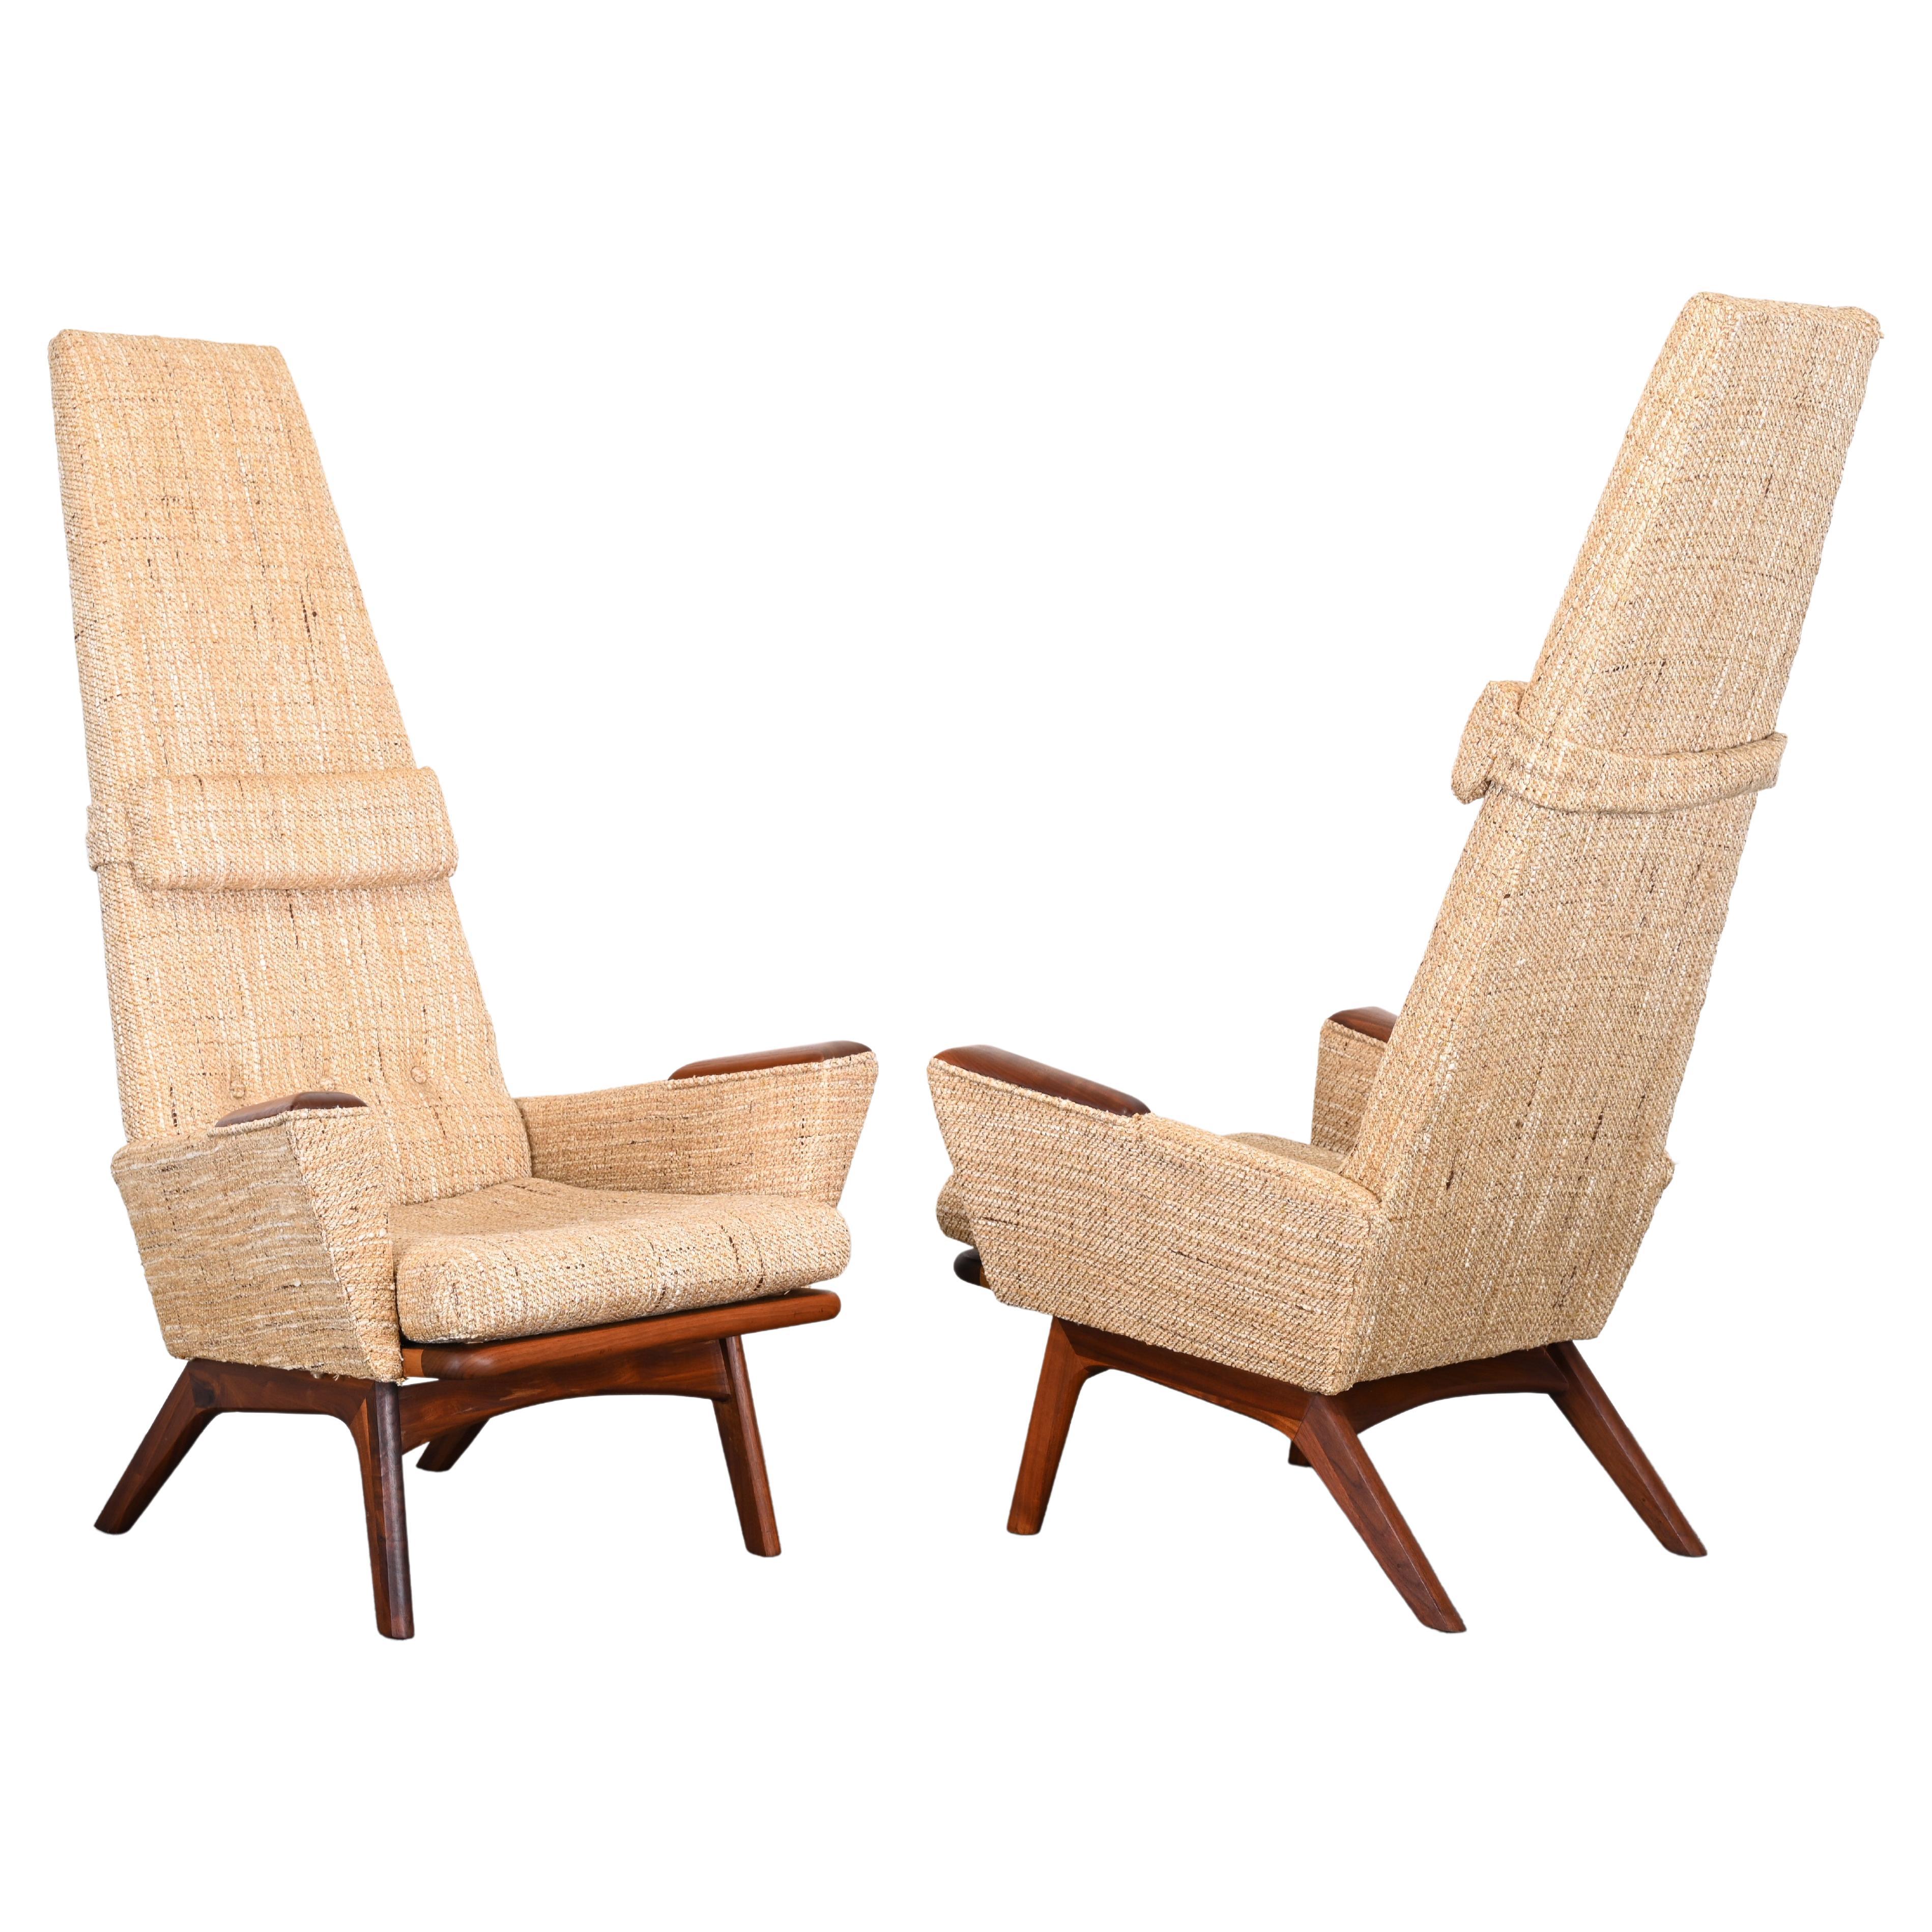 Pair of Adrian Pearsall "Slim Jim" Lounge Chairs for Craft Associates, 1960s For Sale